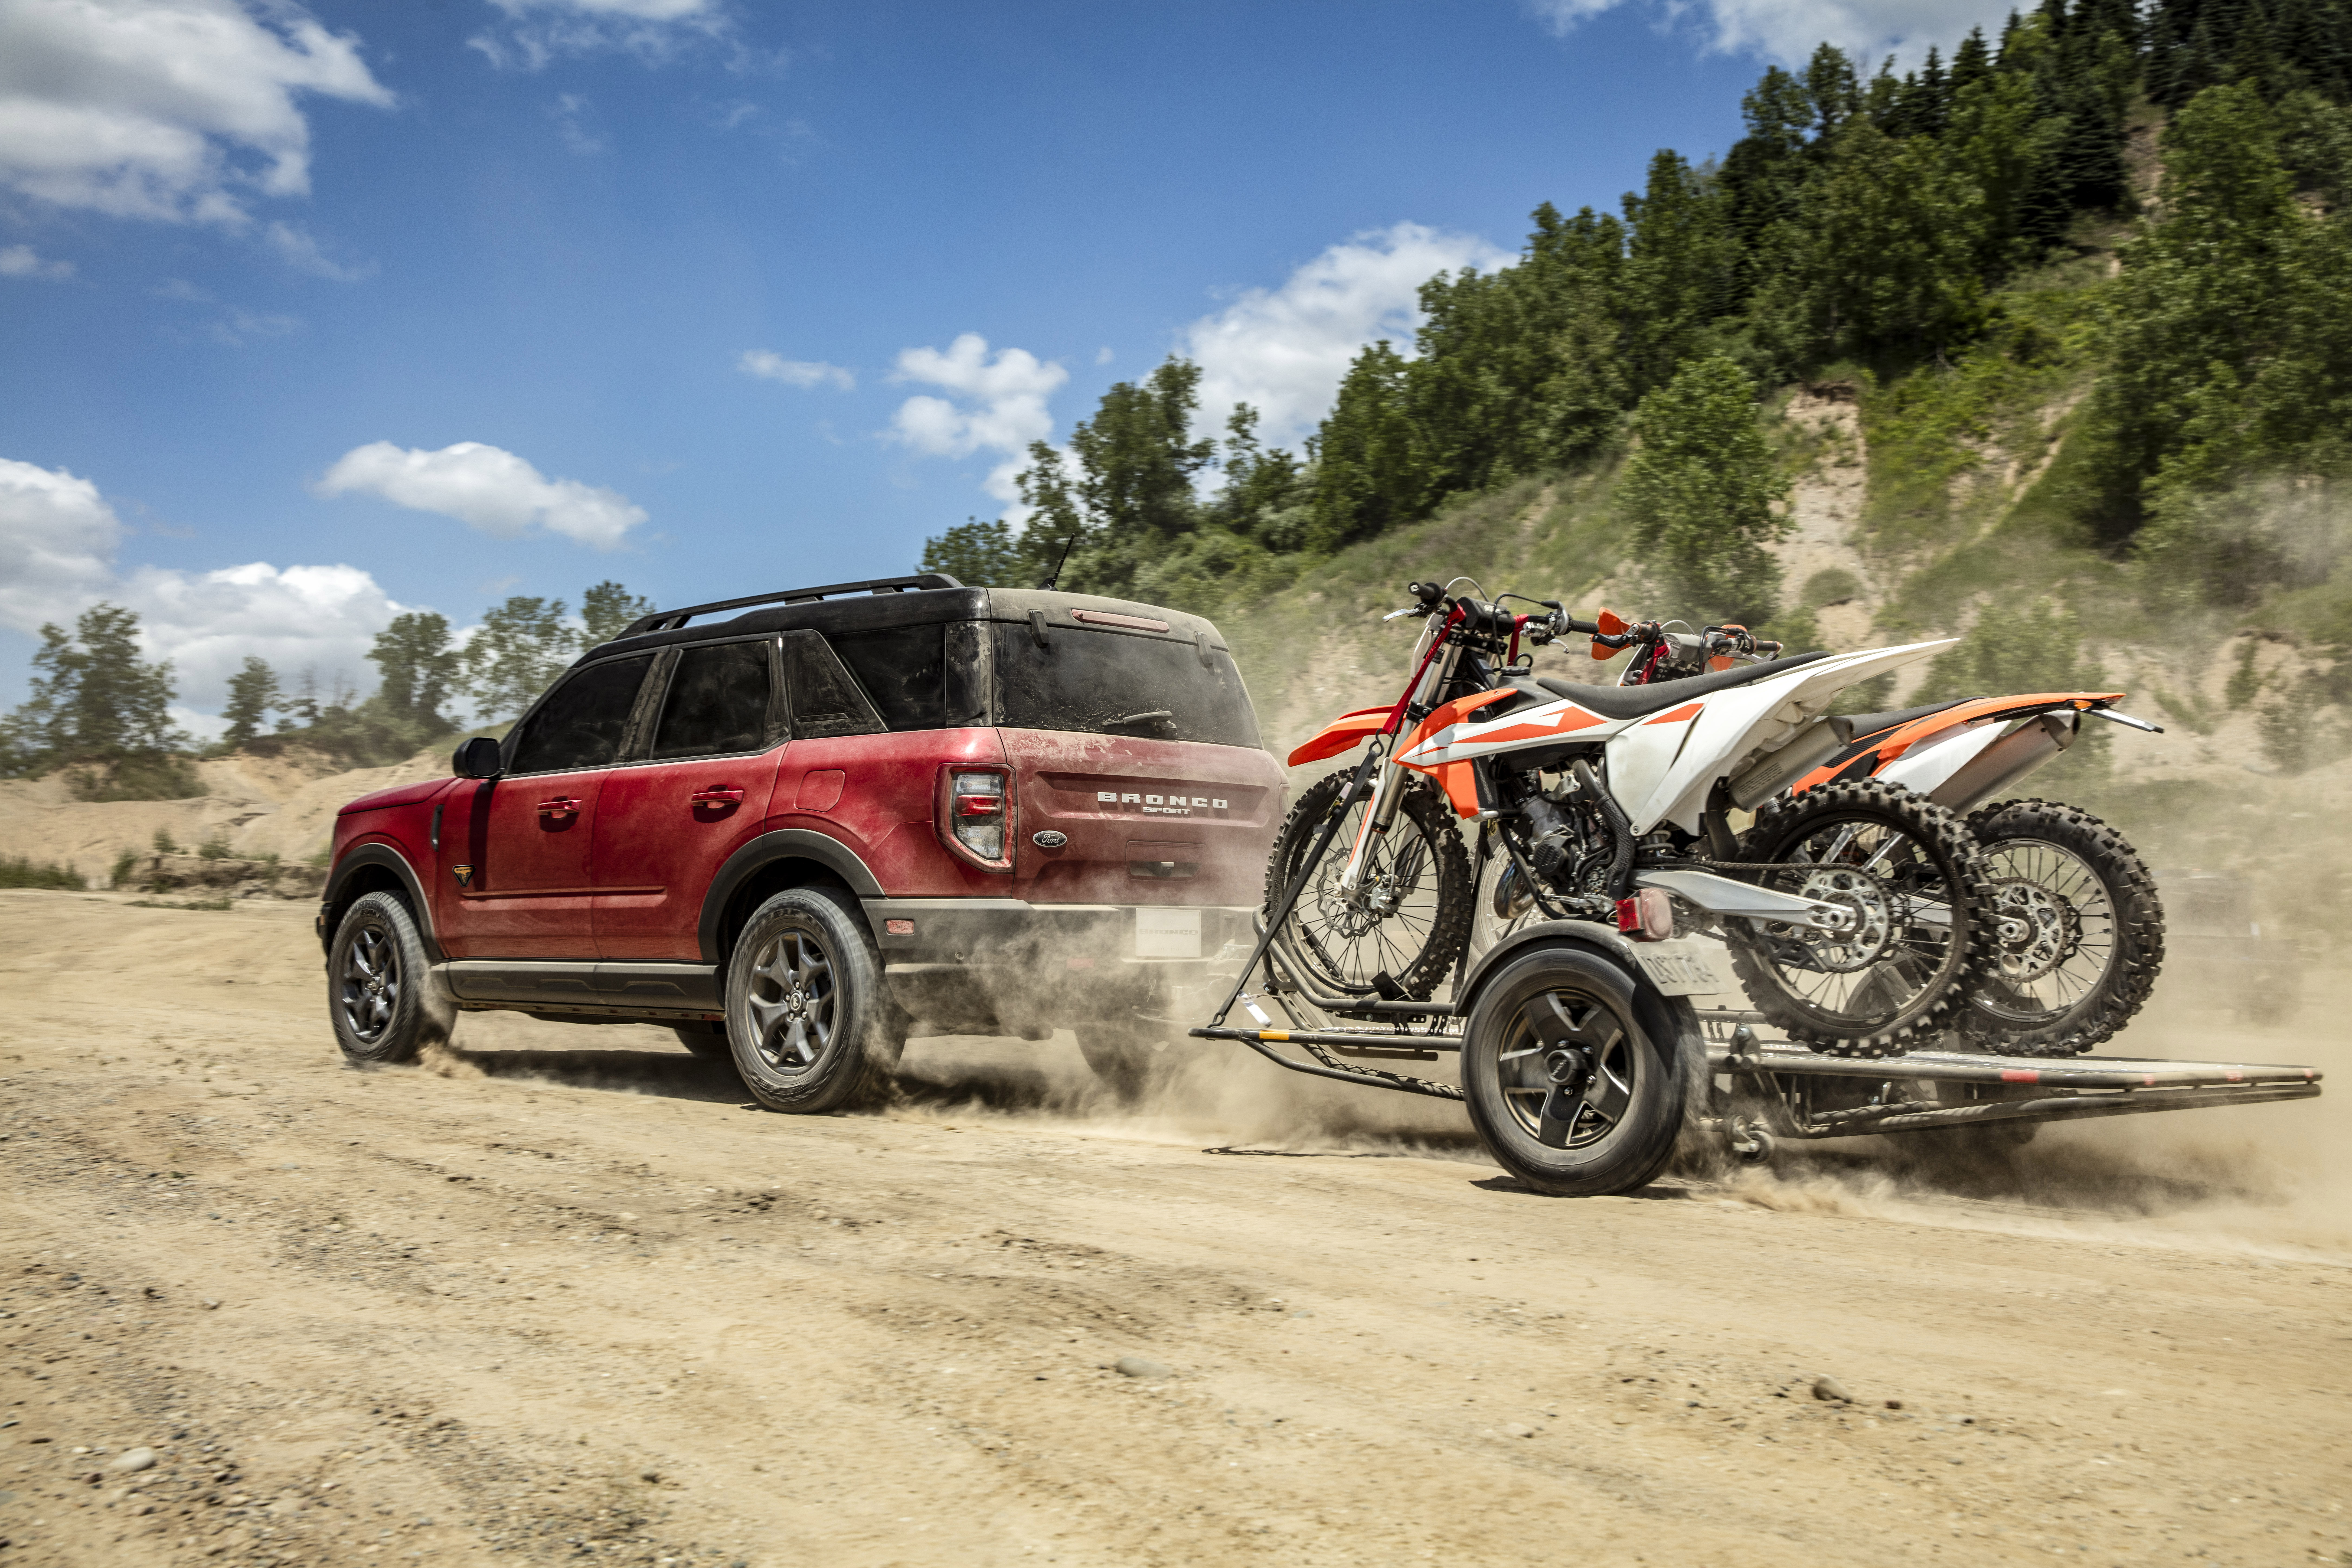 Navigate the Wild: New System Gives Bronco and F-150 Drivers Guidance Off the Beaten Path